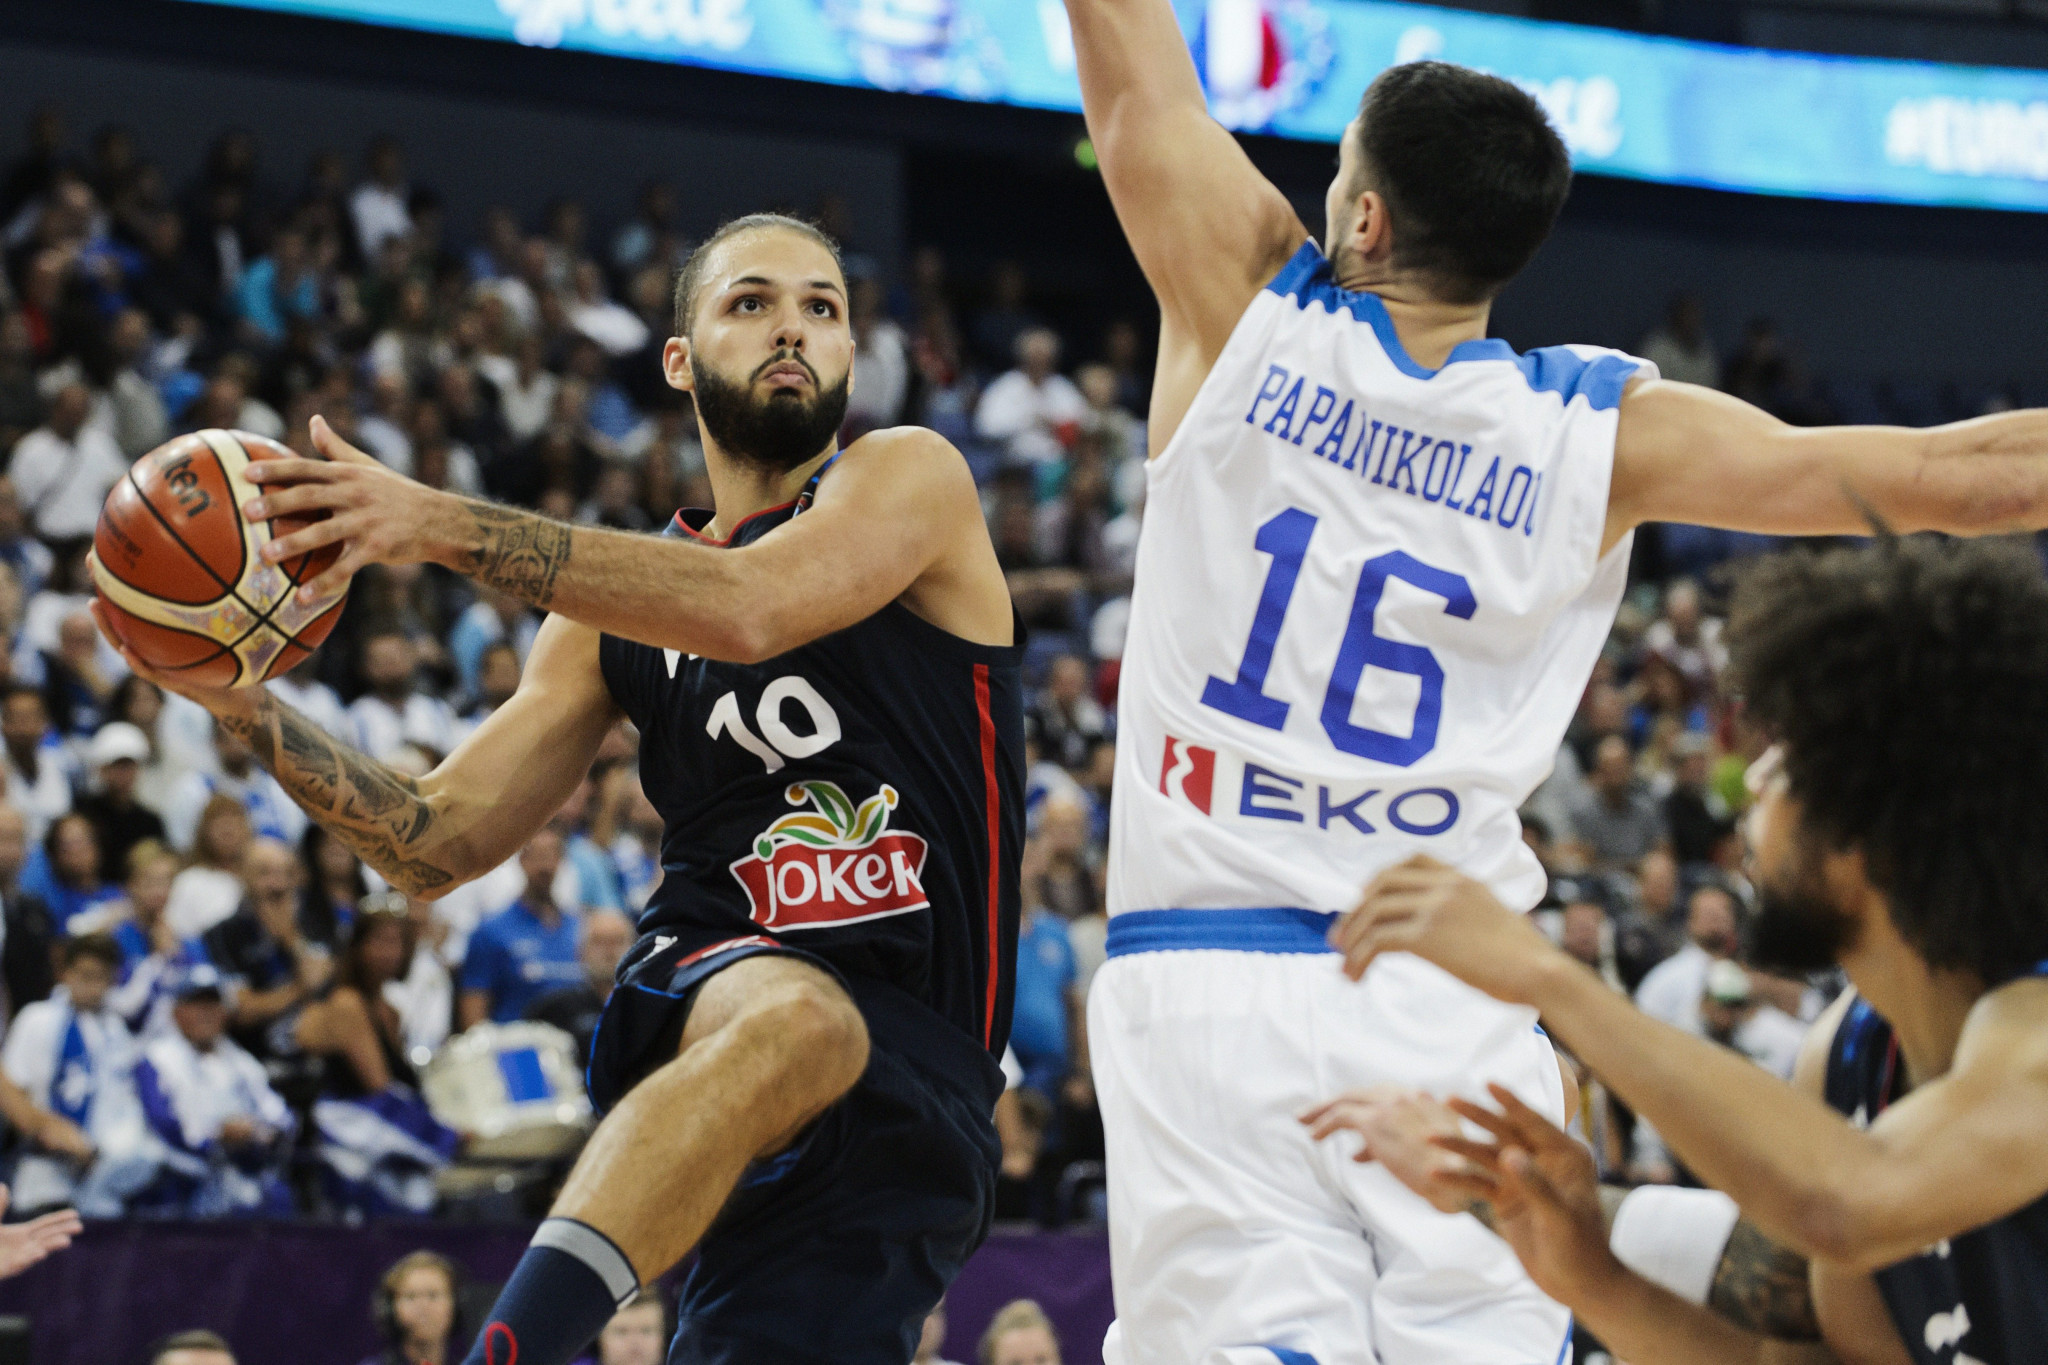 France bounce back from shock defeat at EuroBasket